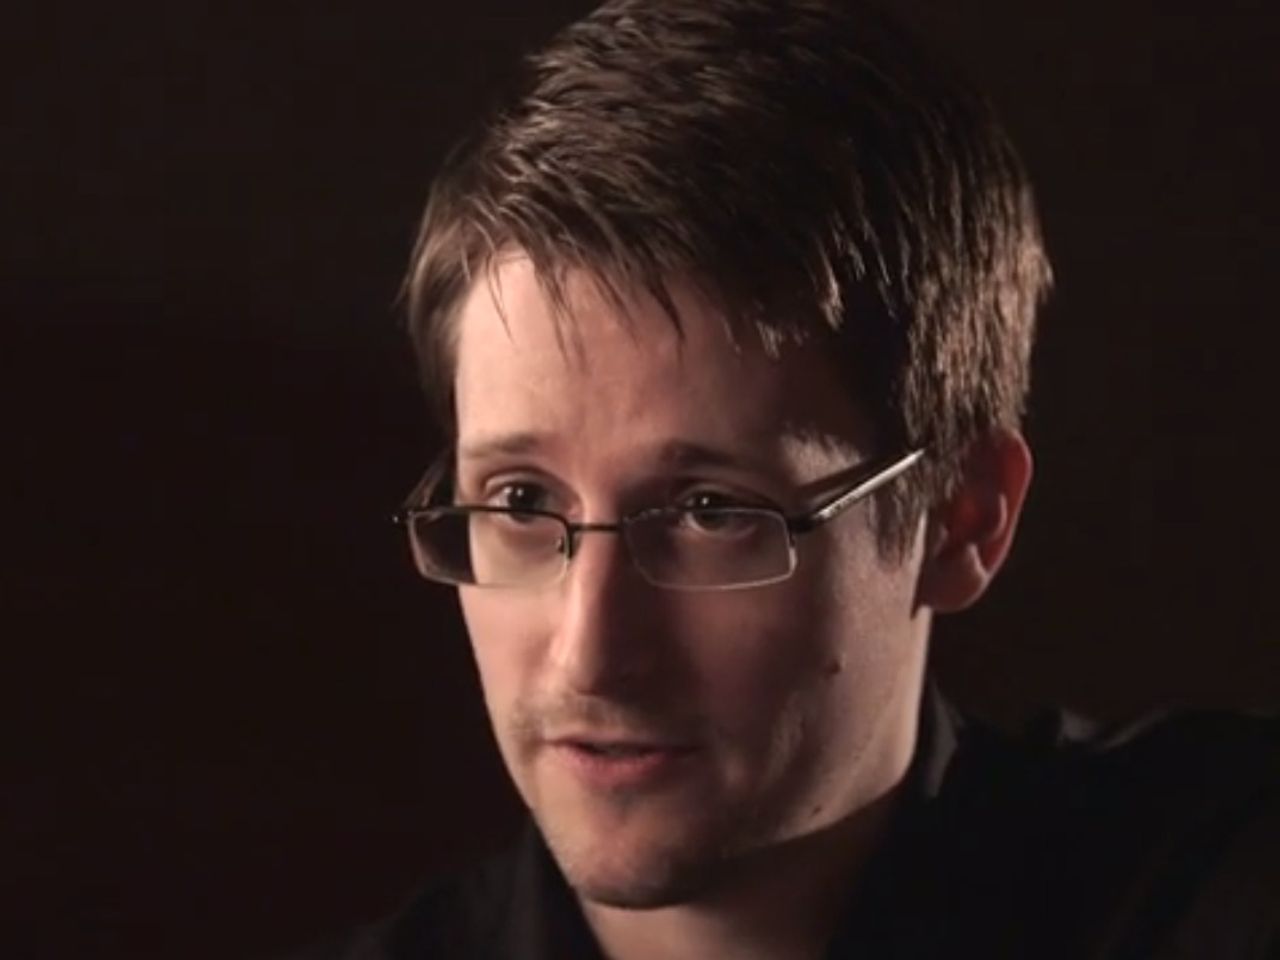 edward-snowden-could-soon-be-on-the-path-to-russian-citizenship